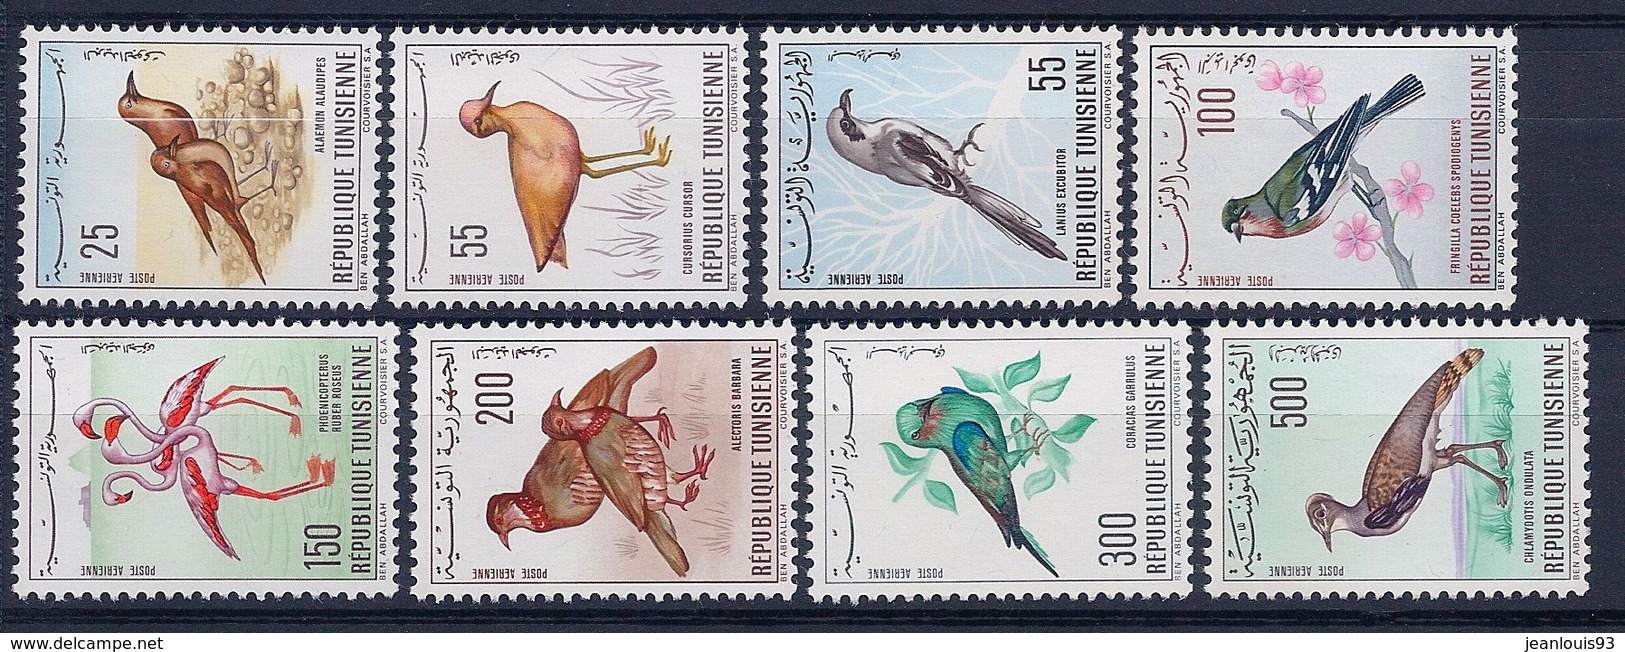 TUNISIE - PA 26/33  OISEAUX COMPLETE NEUF** MLH GRAND LUXE COTE 47 EUR - Tunisie (1956-...)